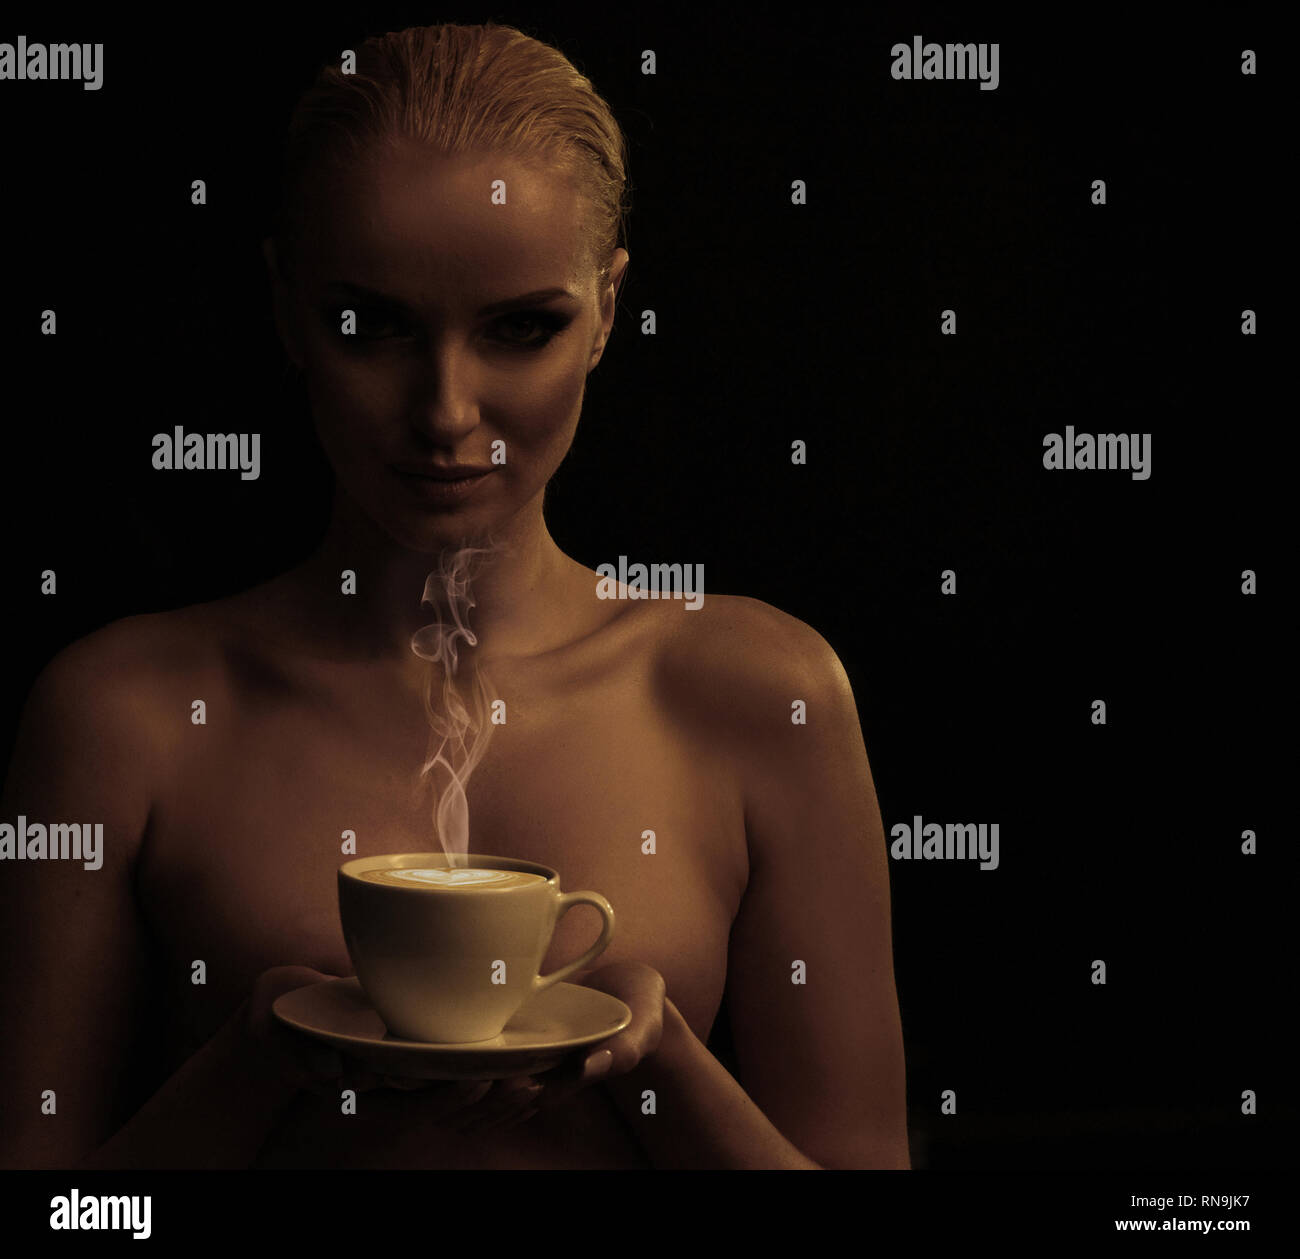 Nude Woman with a Cup of Coffee Stock Photo - Image of adult, emotional:  51527492